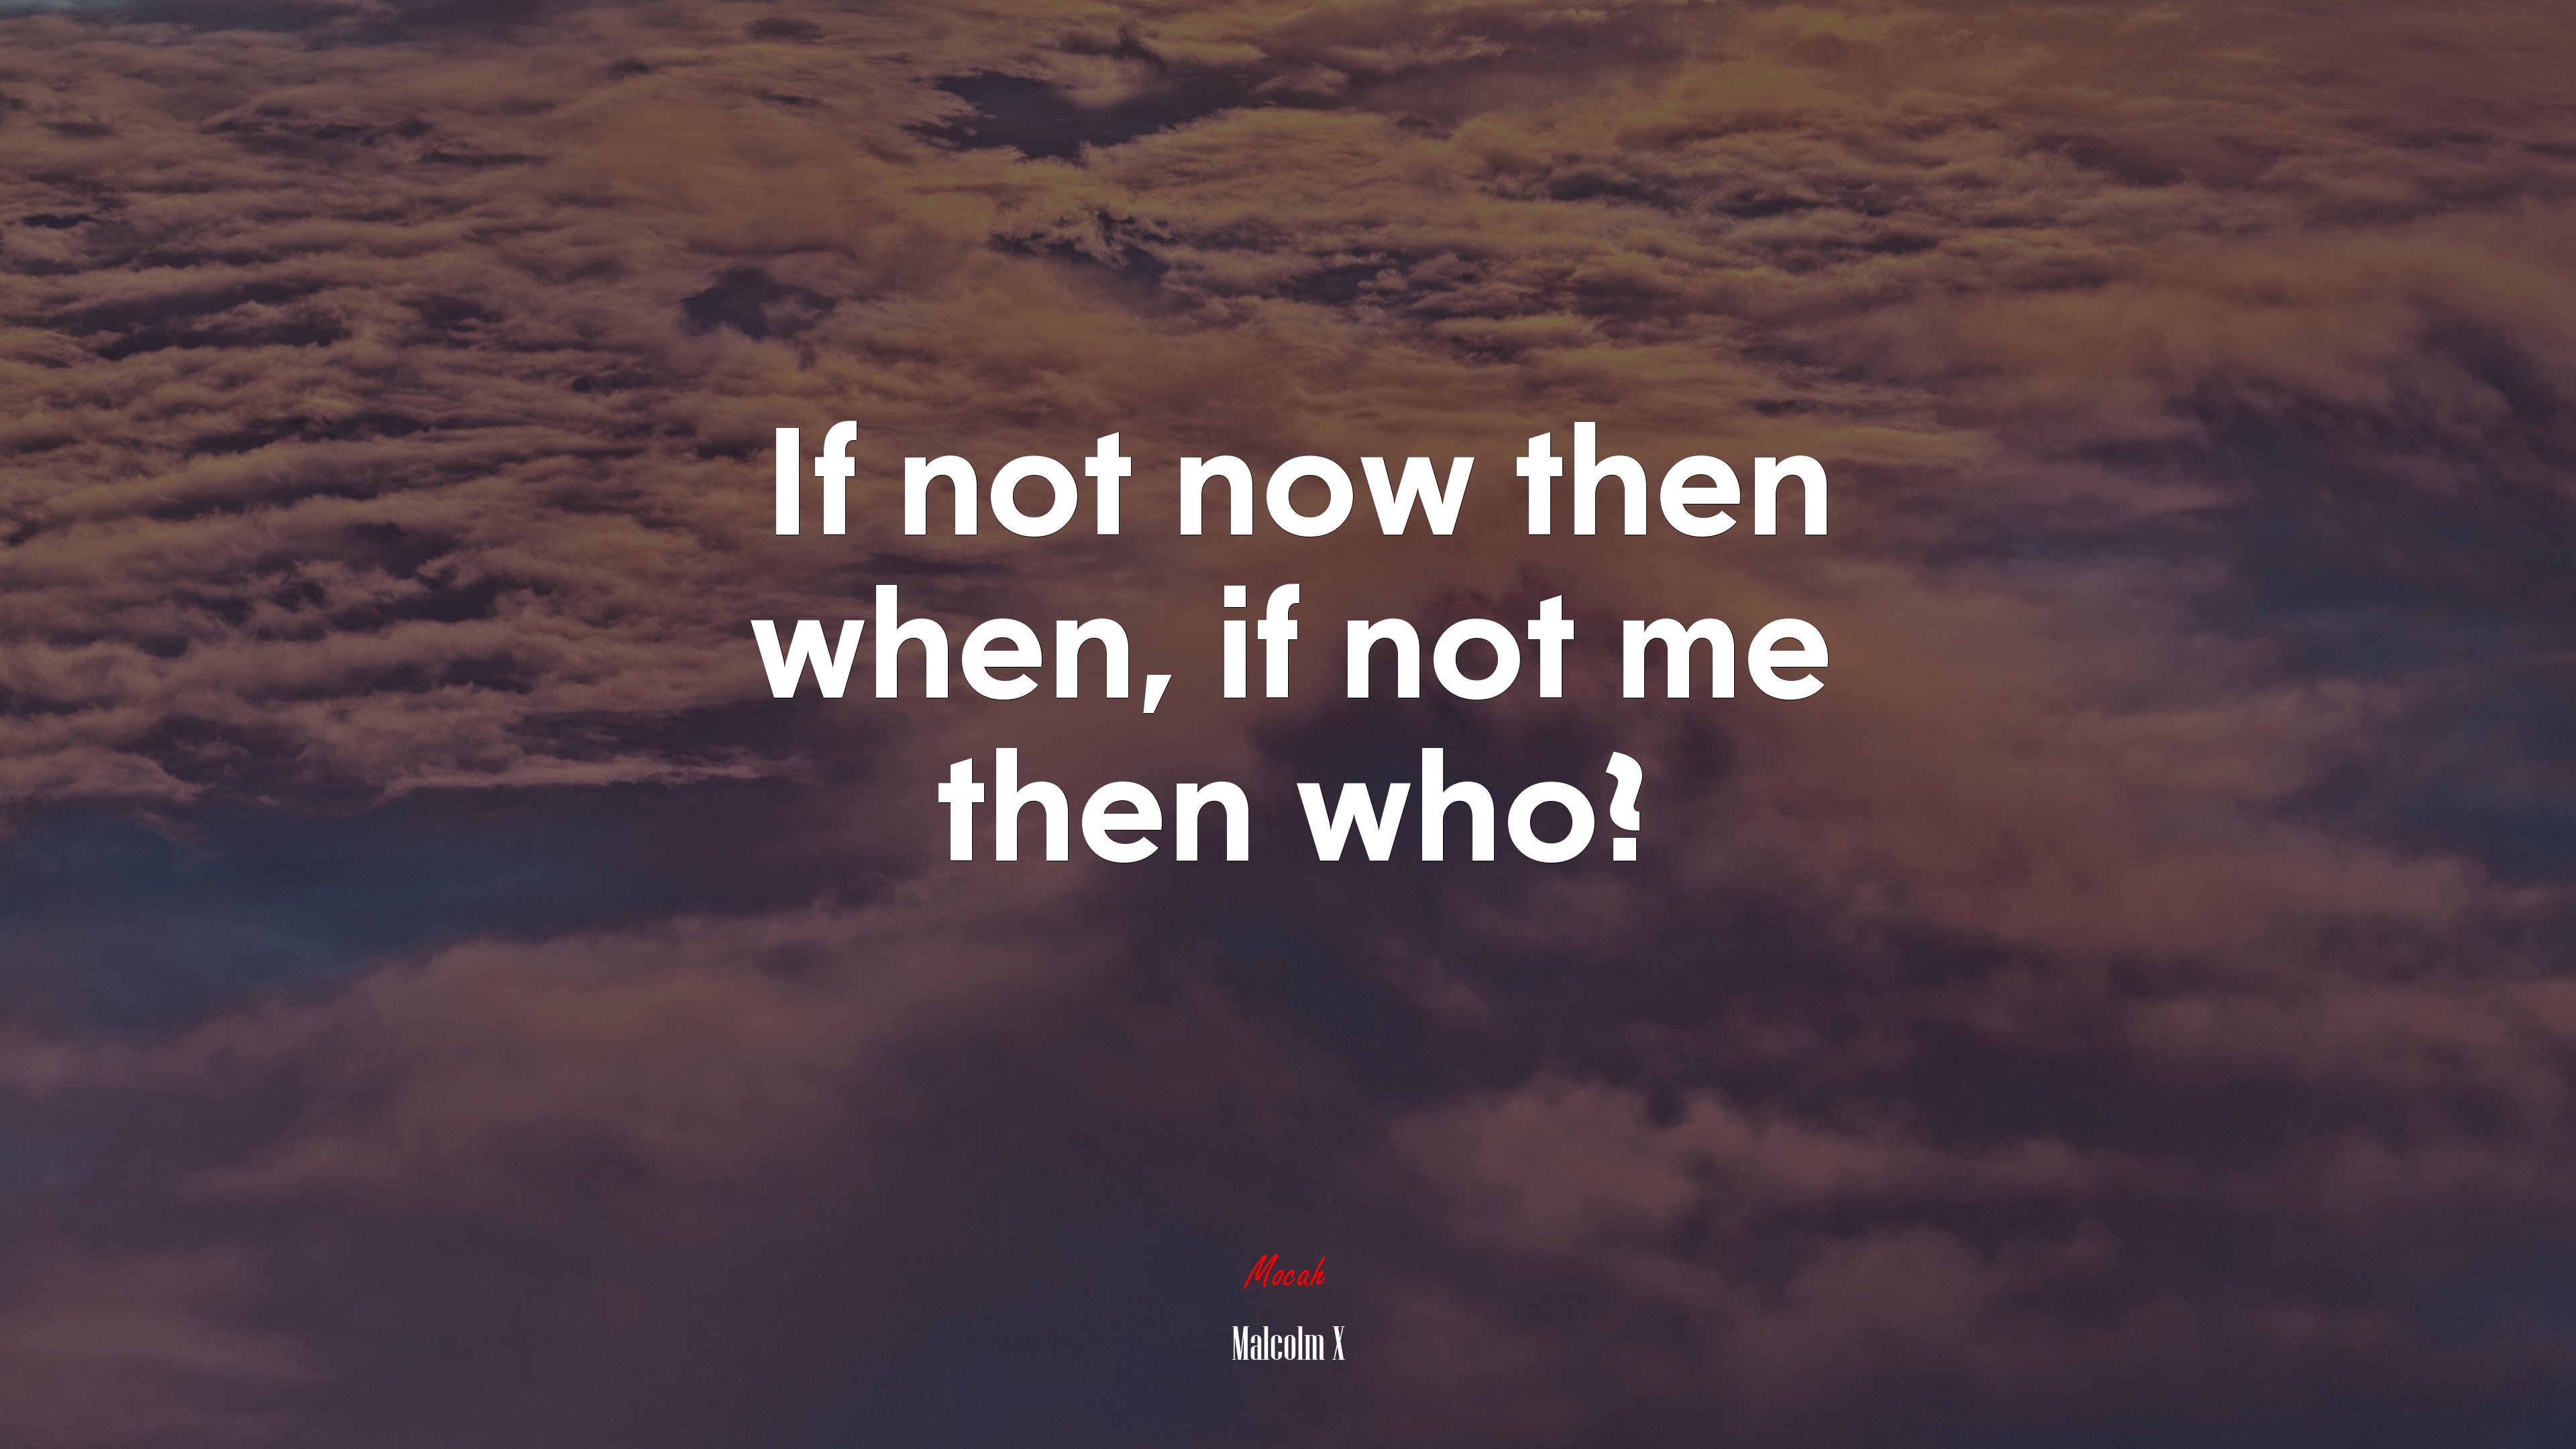 If not now then when, if not me then who?. Malcolm X quote Gallery HD Wallpaper